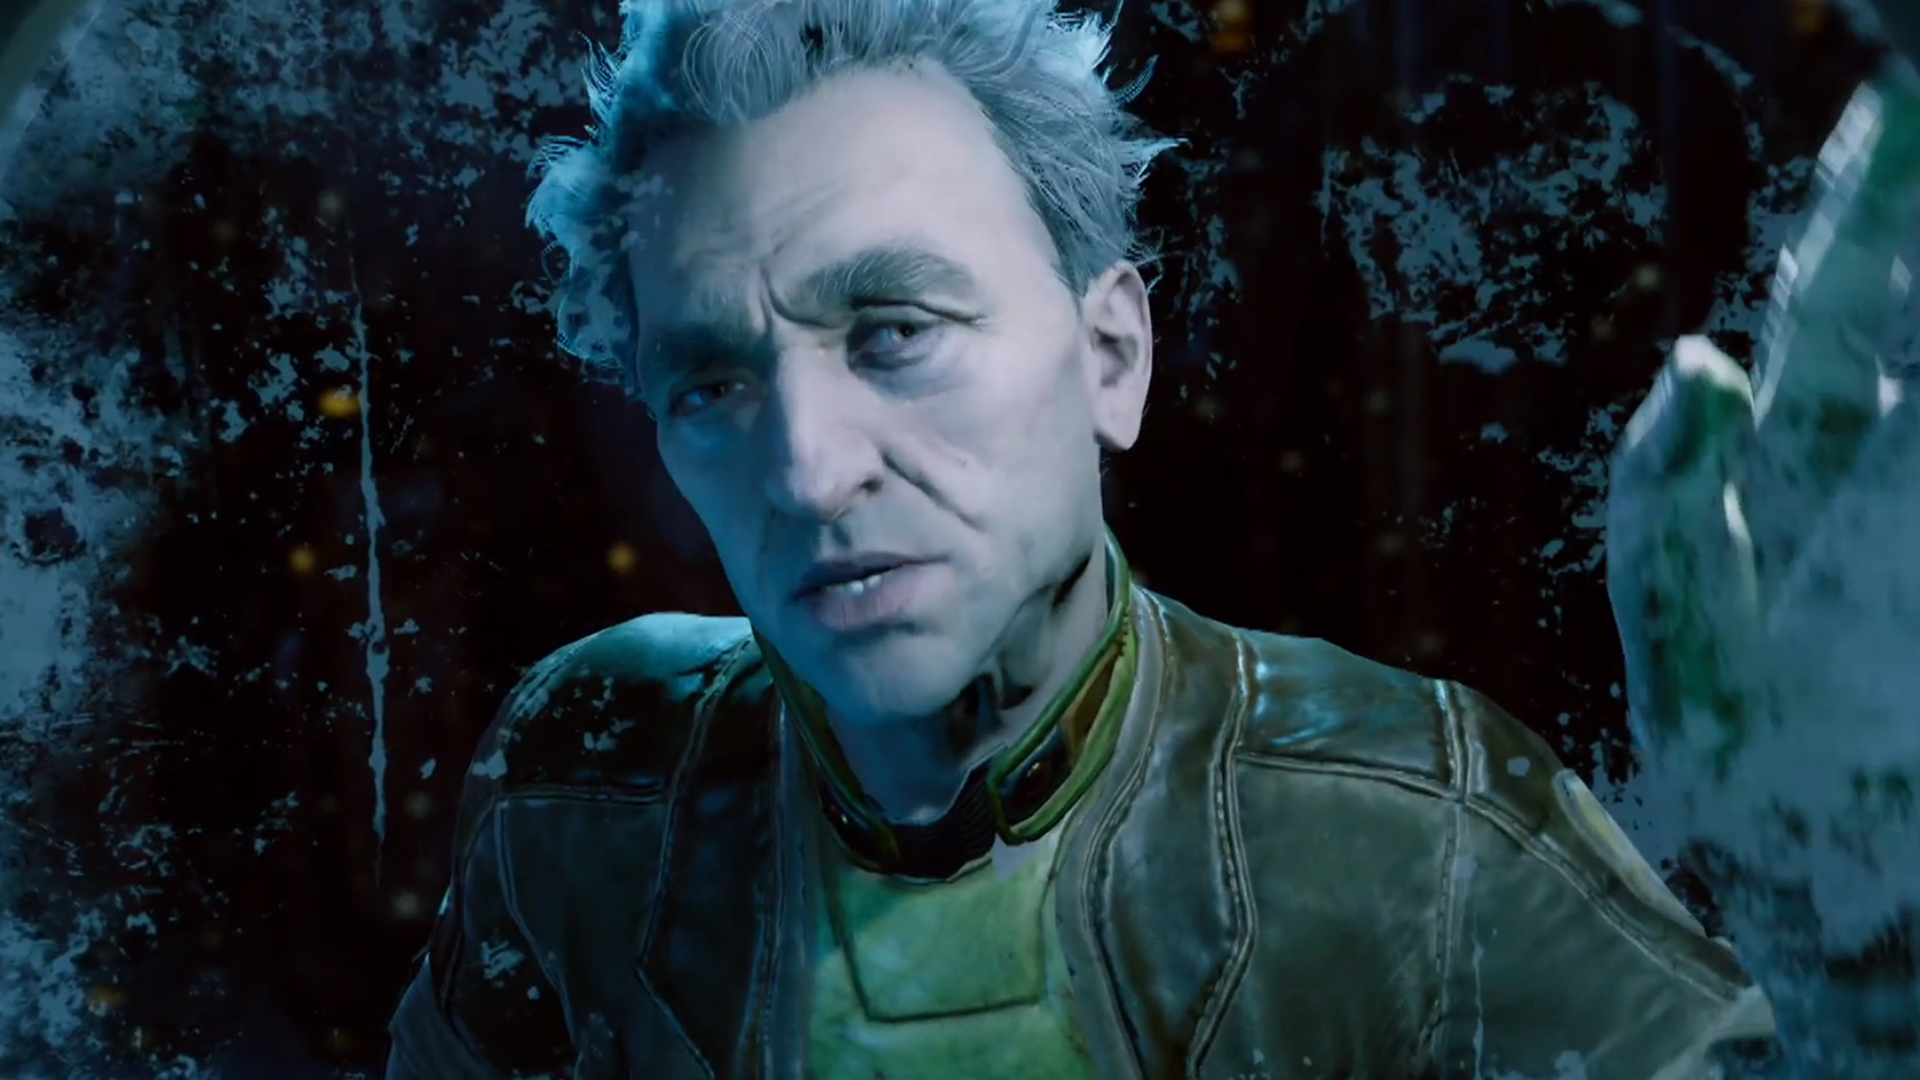 THE OUTER WORLDS: No Mod Support, Multiple Endings, DLC Plans, No